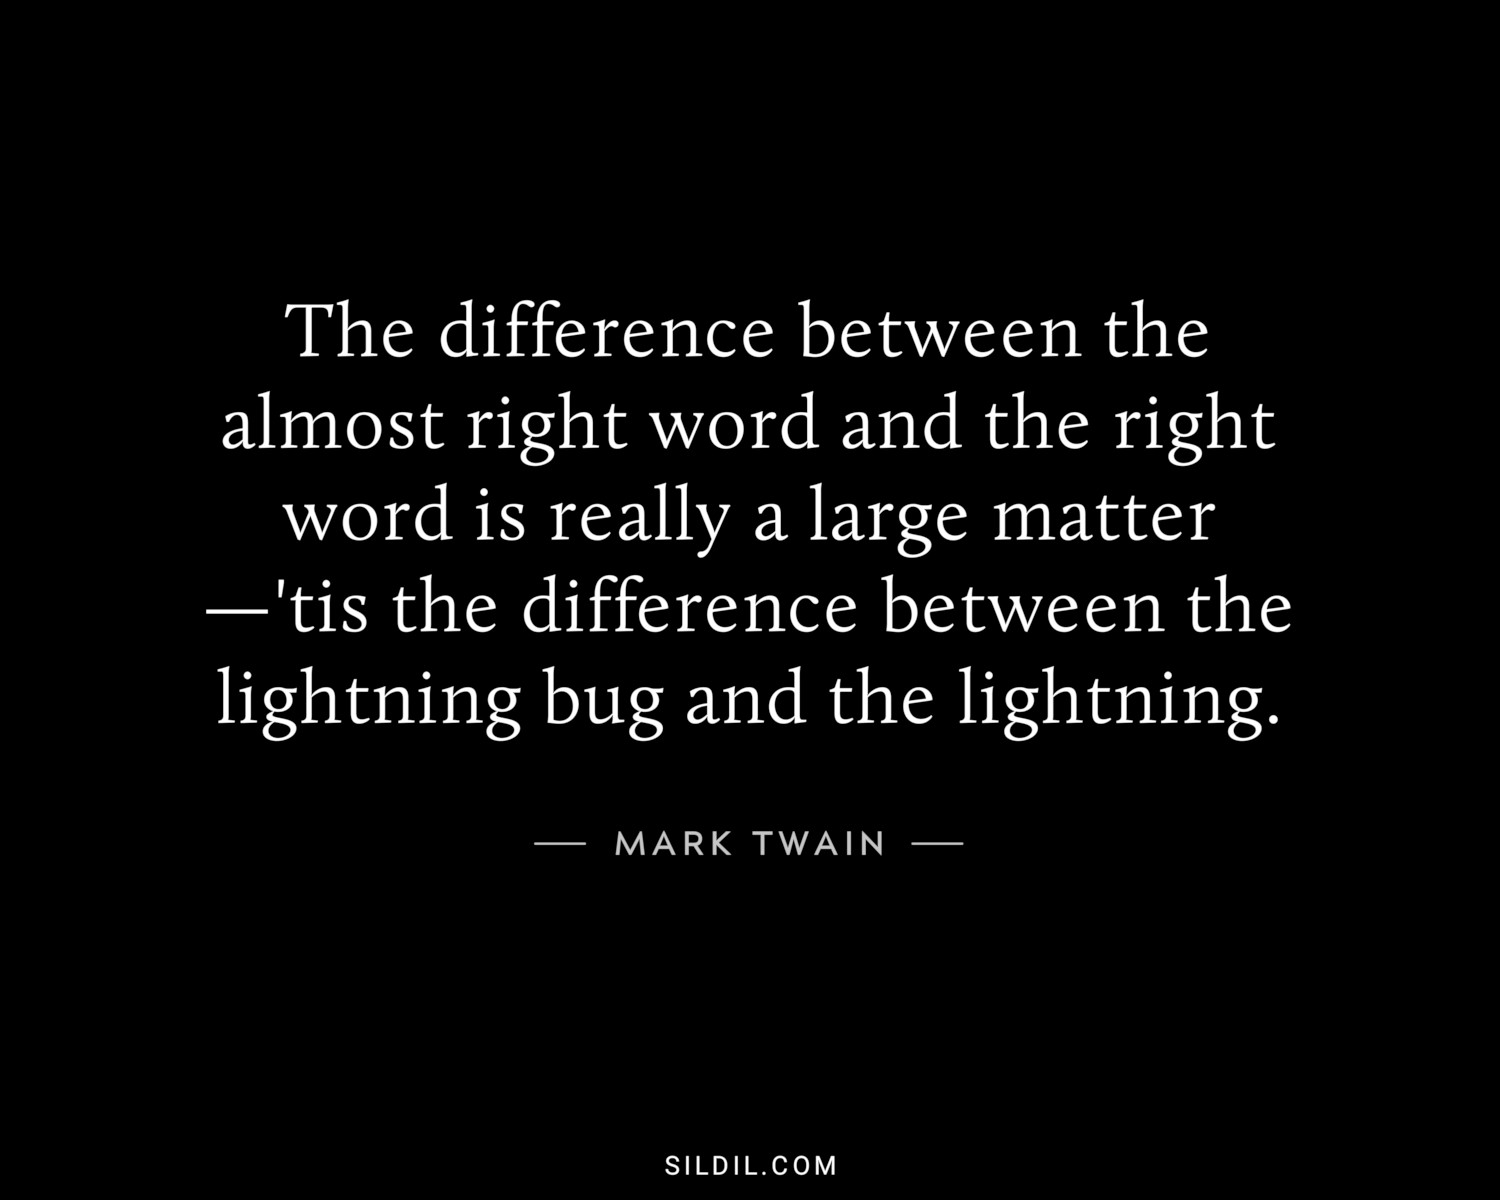 The difference between the almost right word and the right word is really a large matter—'tis the difference between the lightning bug and the lightning.